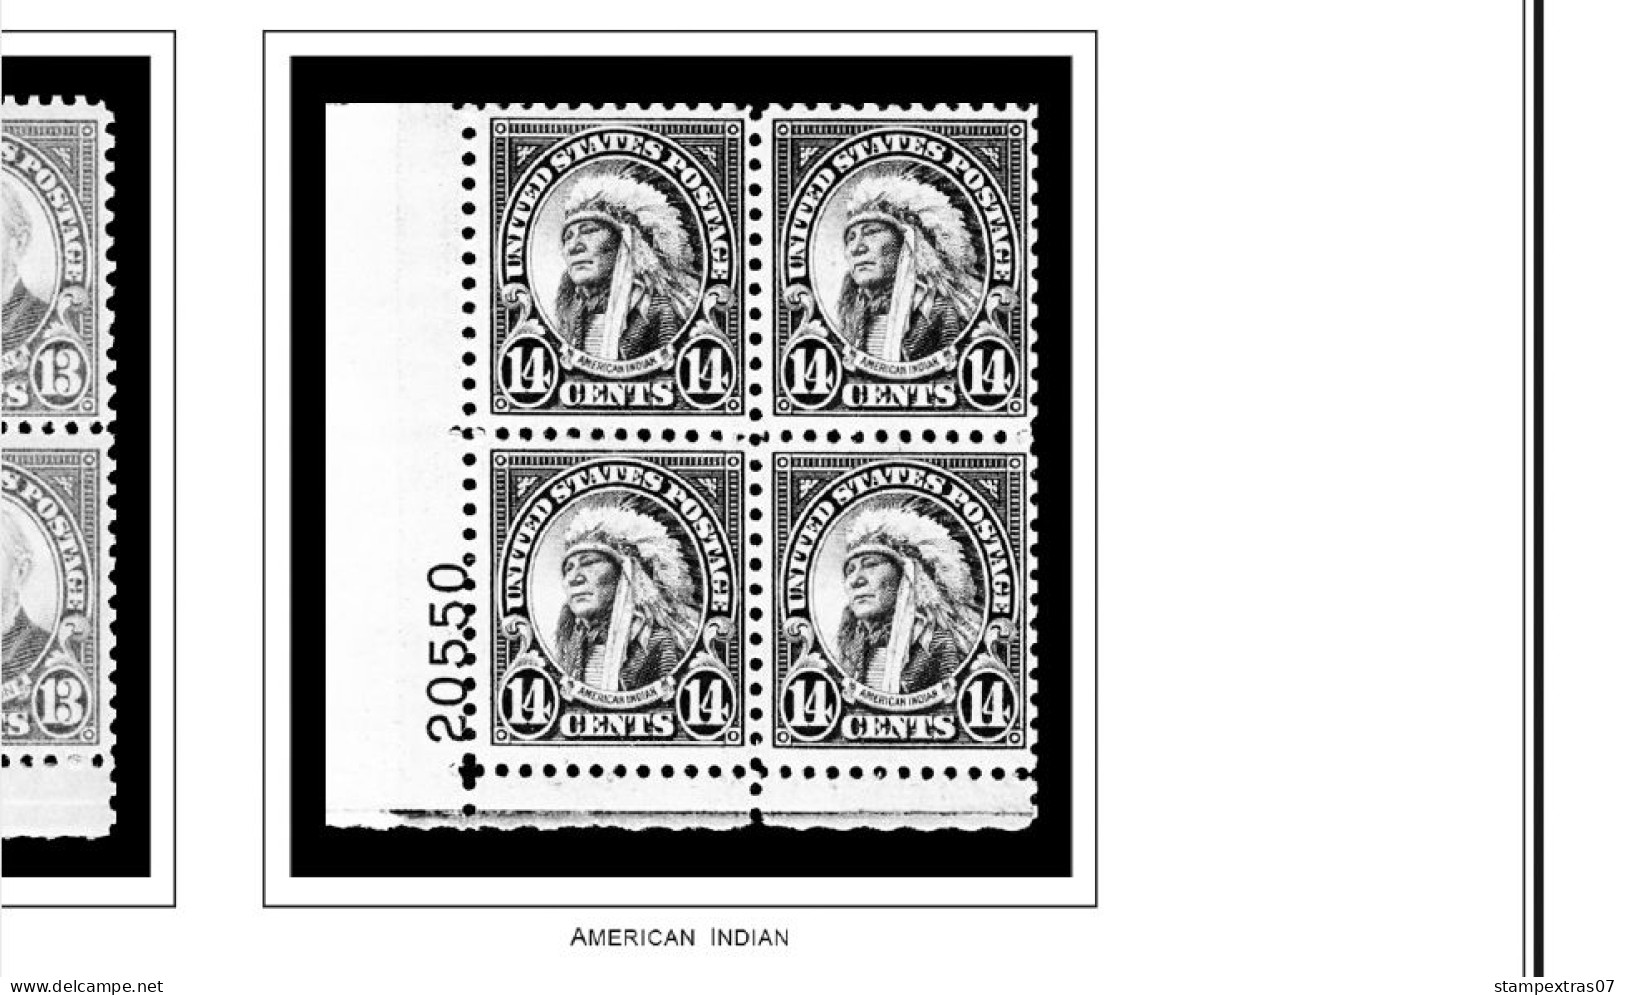 US 1930-1939 PLATE BLOCKS STAMP ALBUM PAGES (47 B&w Illustrated Pages) - Inglés